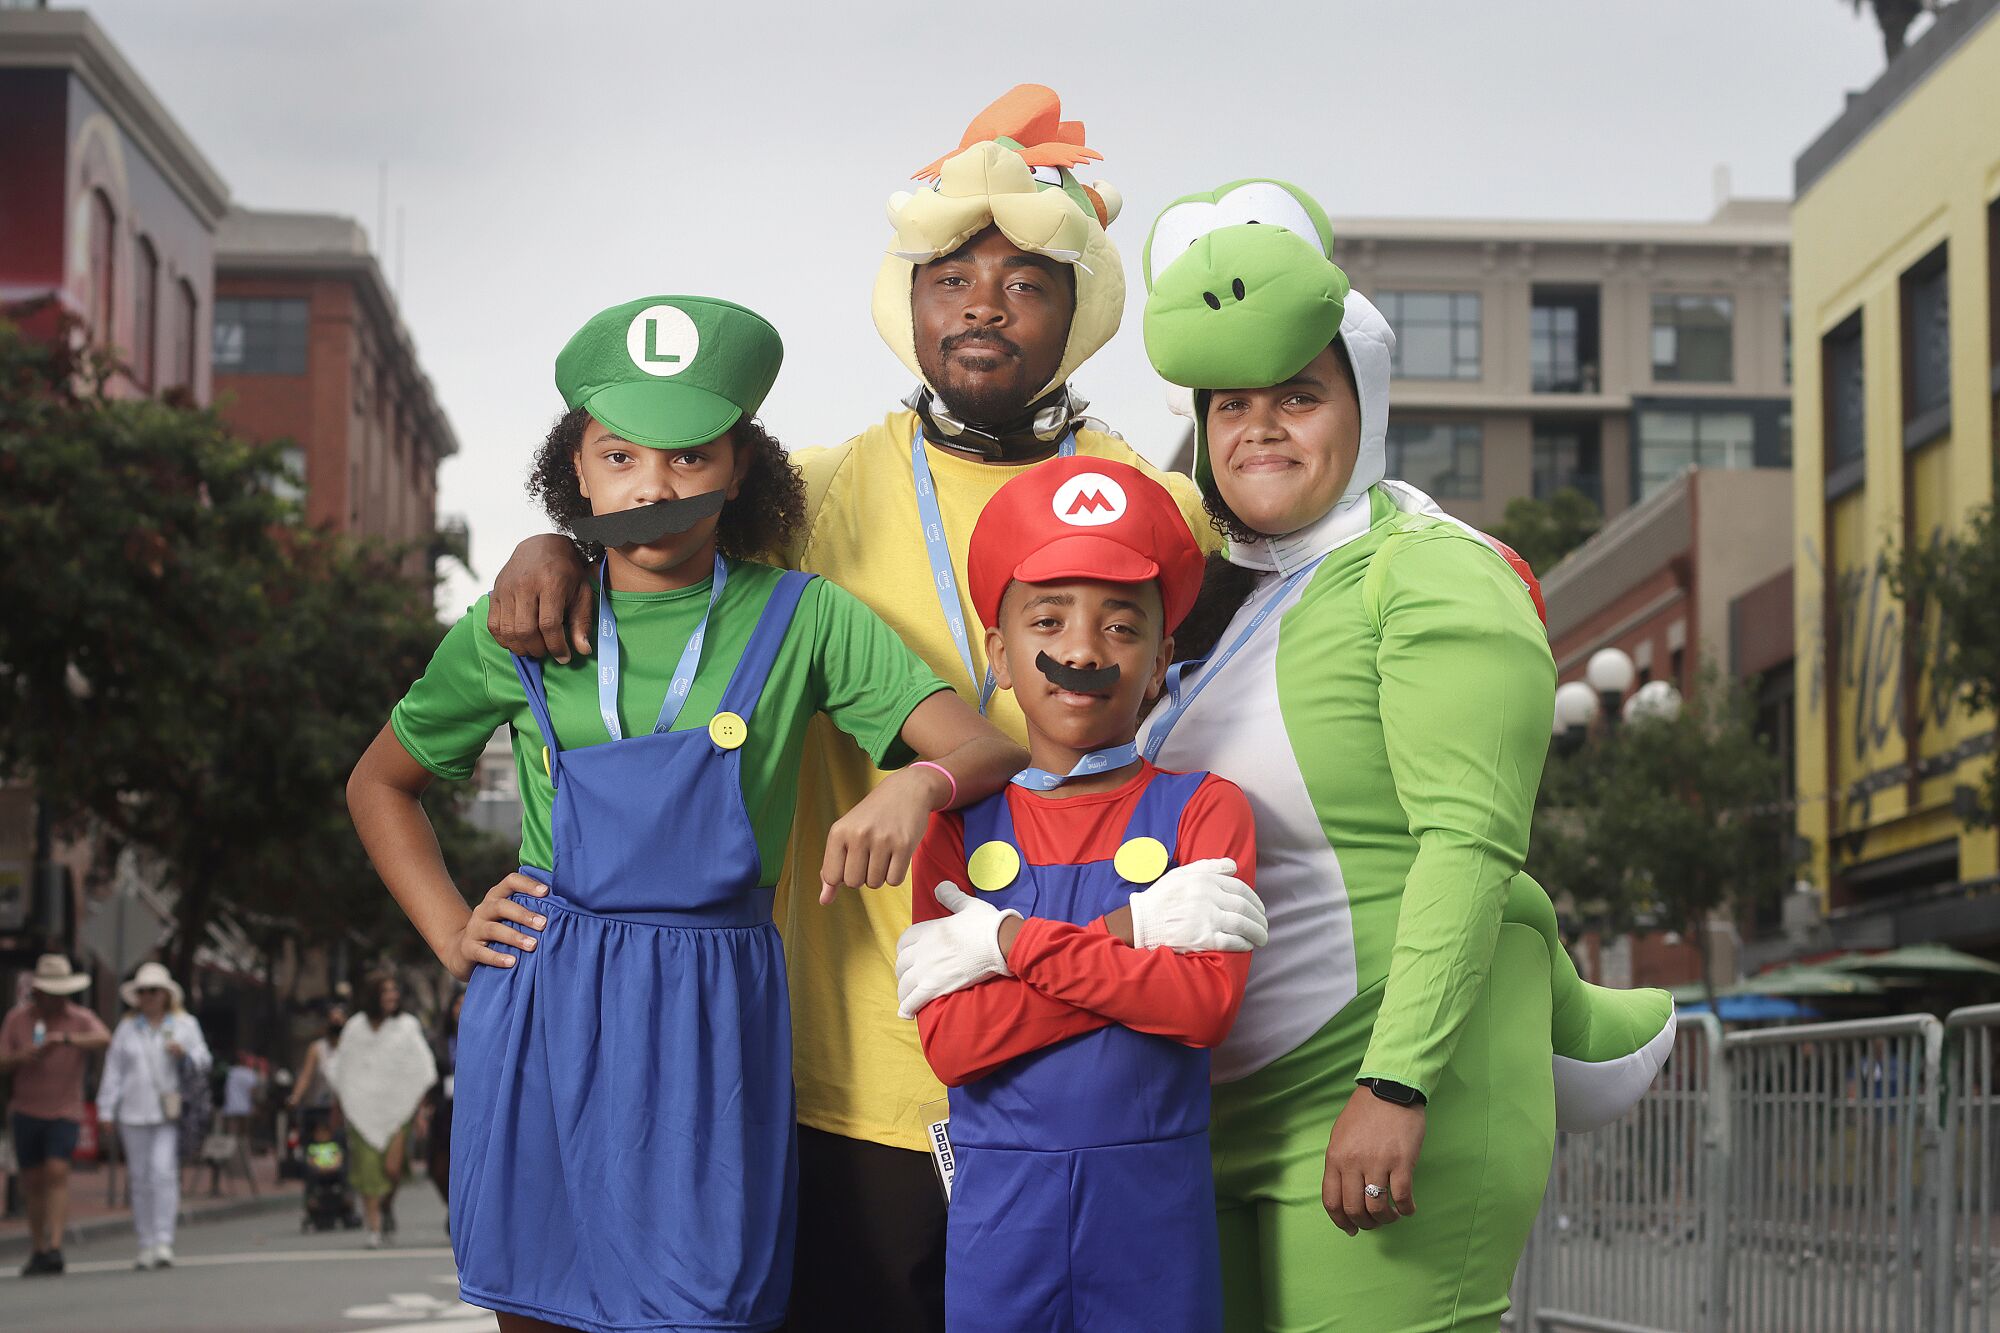 A family dressed as Super Mario Bros. characters